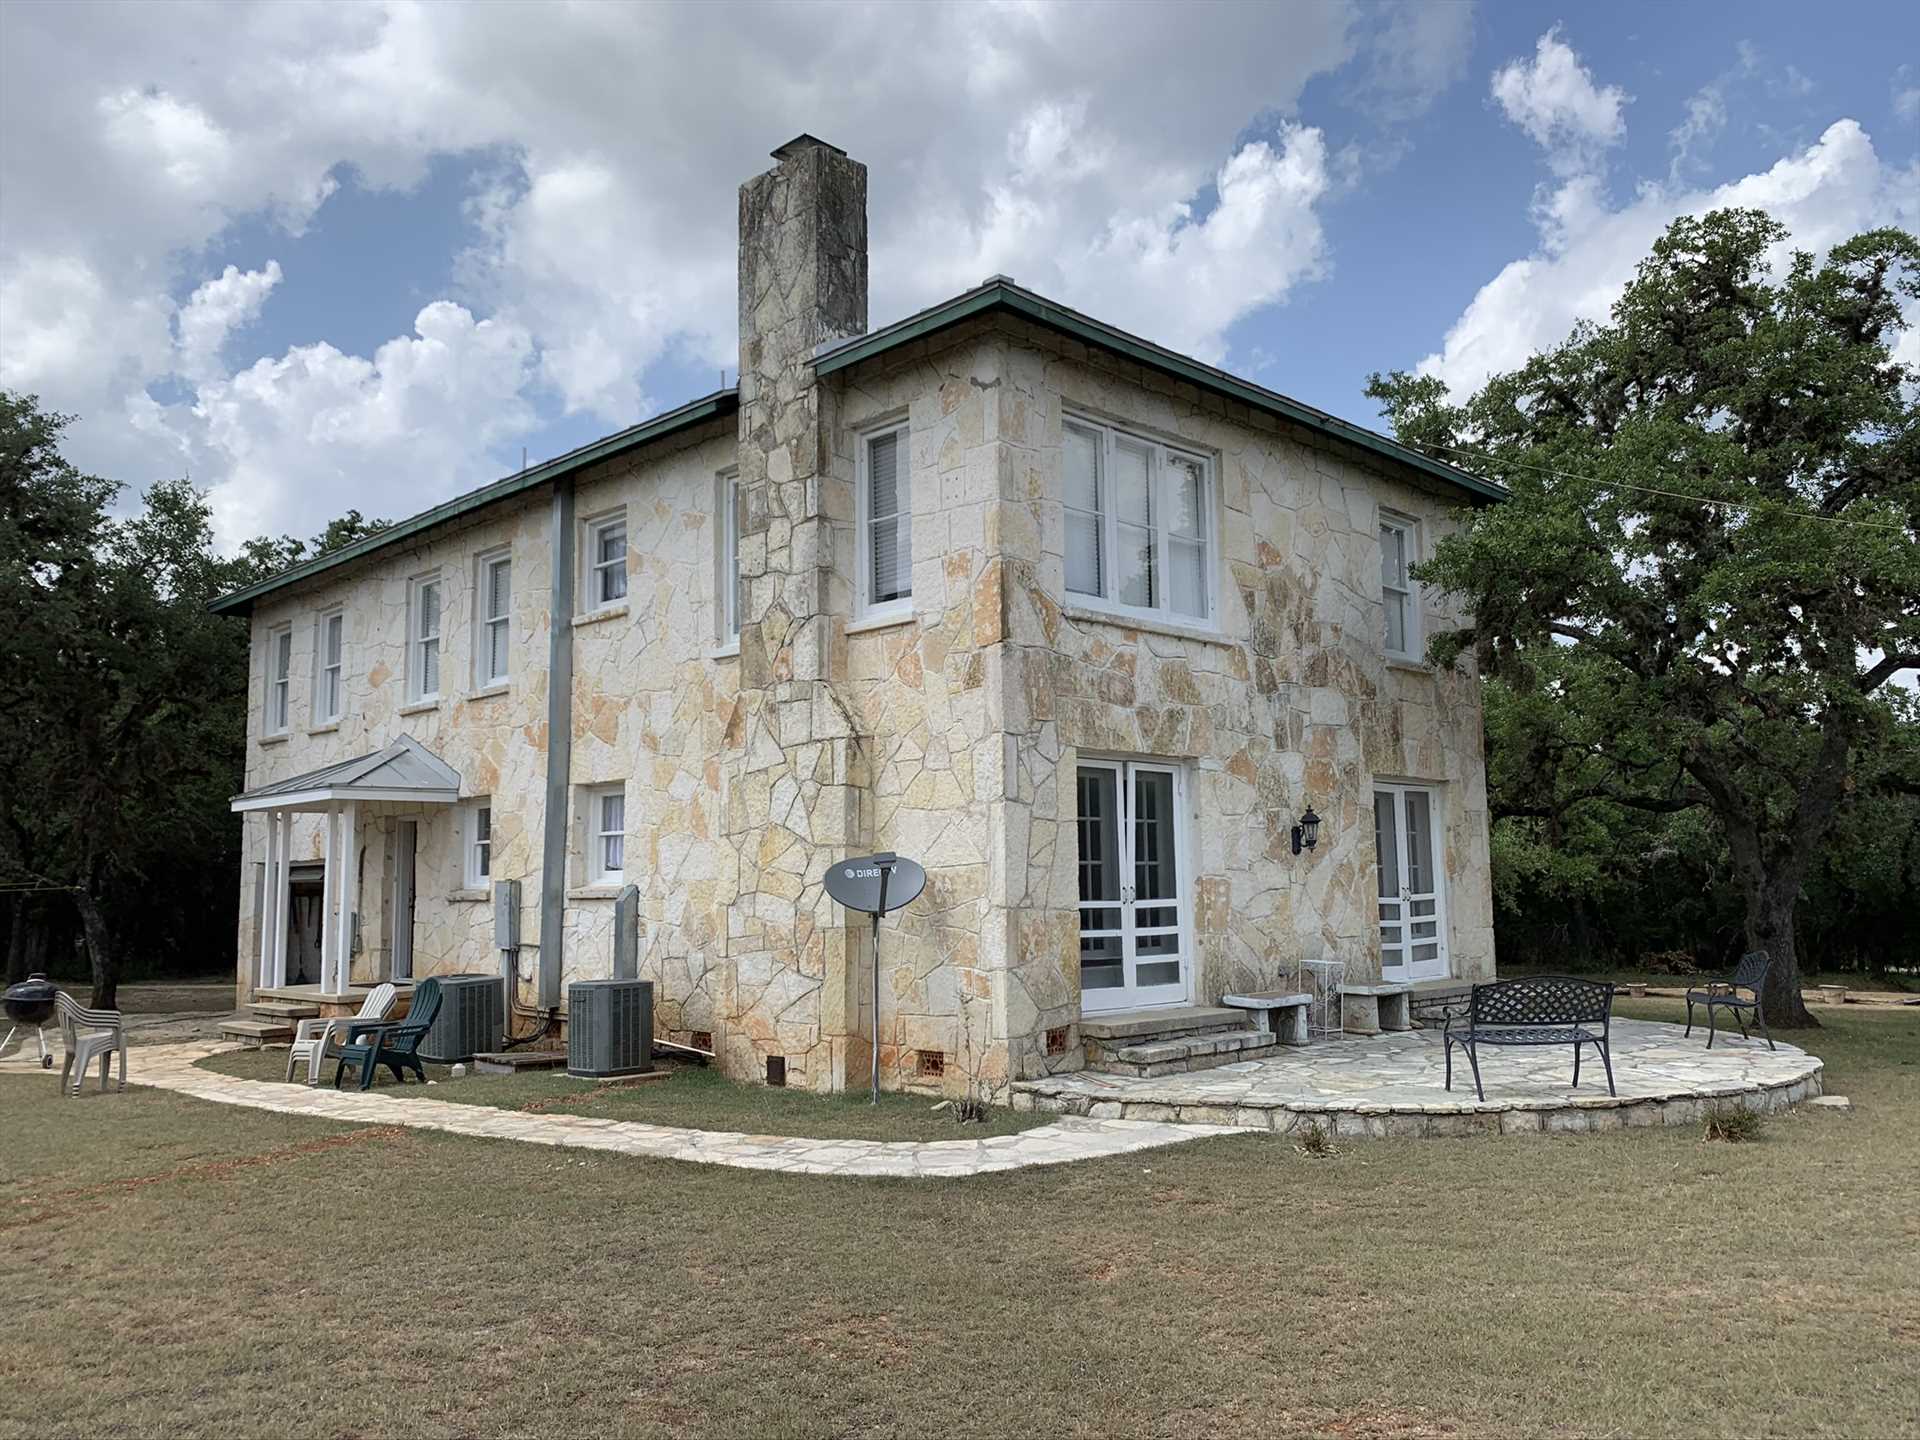                                                 You'll have the best of town and country here-a beautiful and private rural setting that's a short drive from the town conveniences of Bandera!